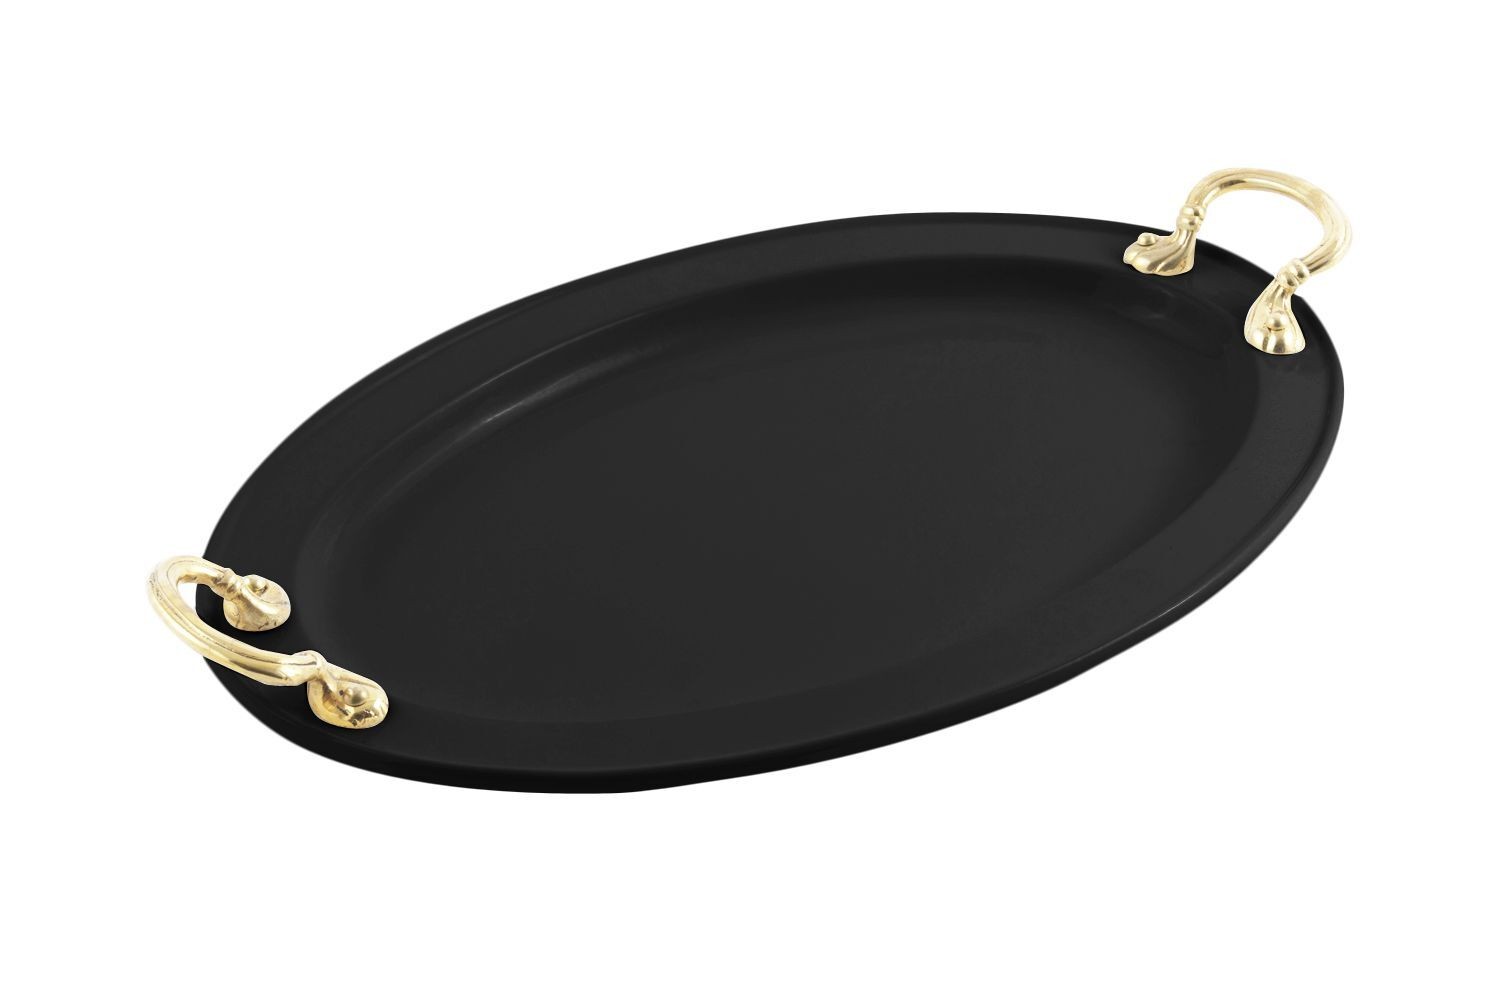 Bon Chef 2044HRS Oval Platter with Round Handles, Sandstone 12 1/4" x 17"